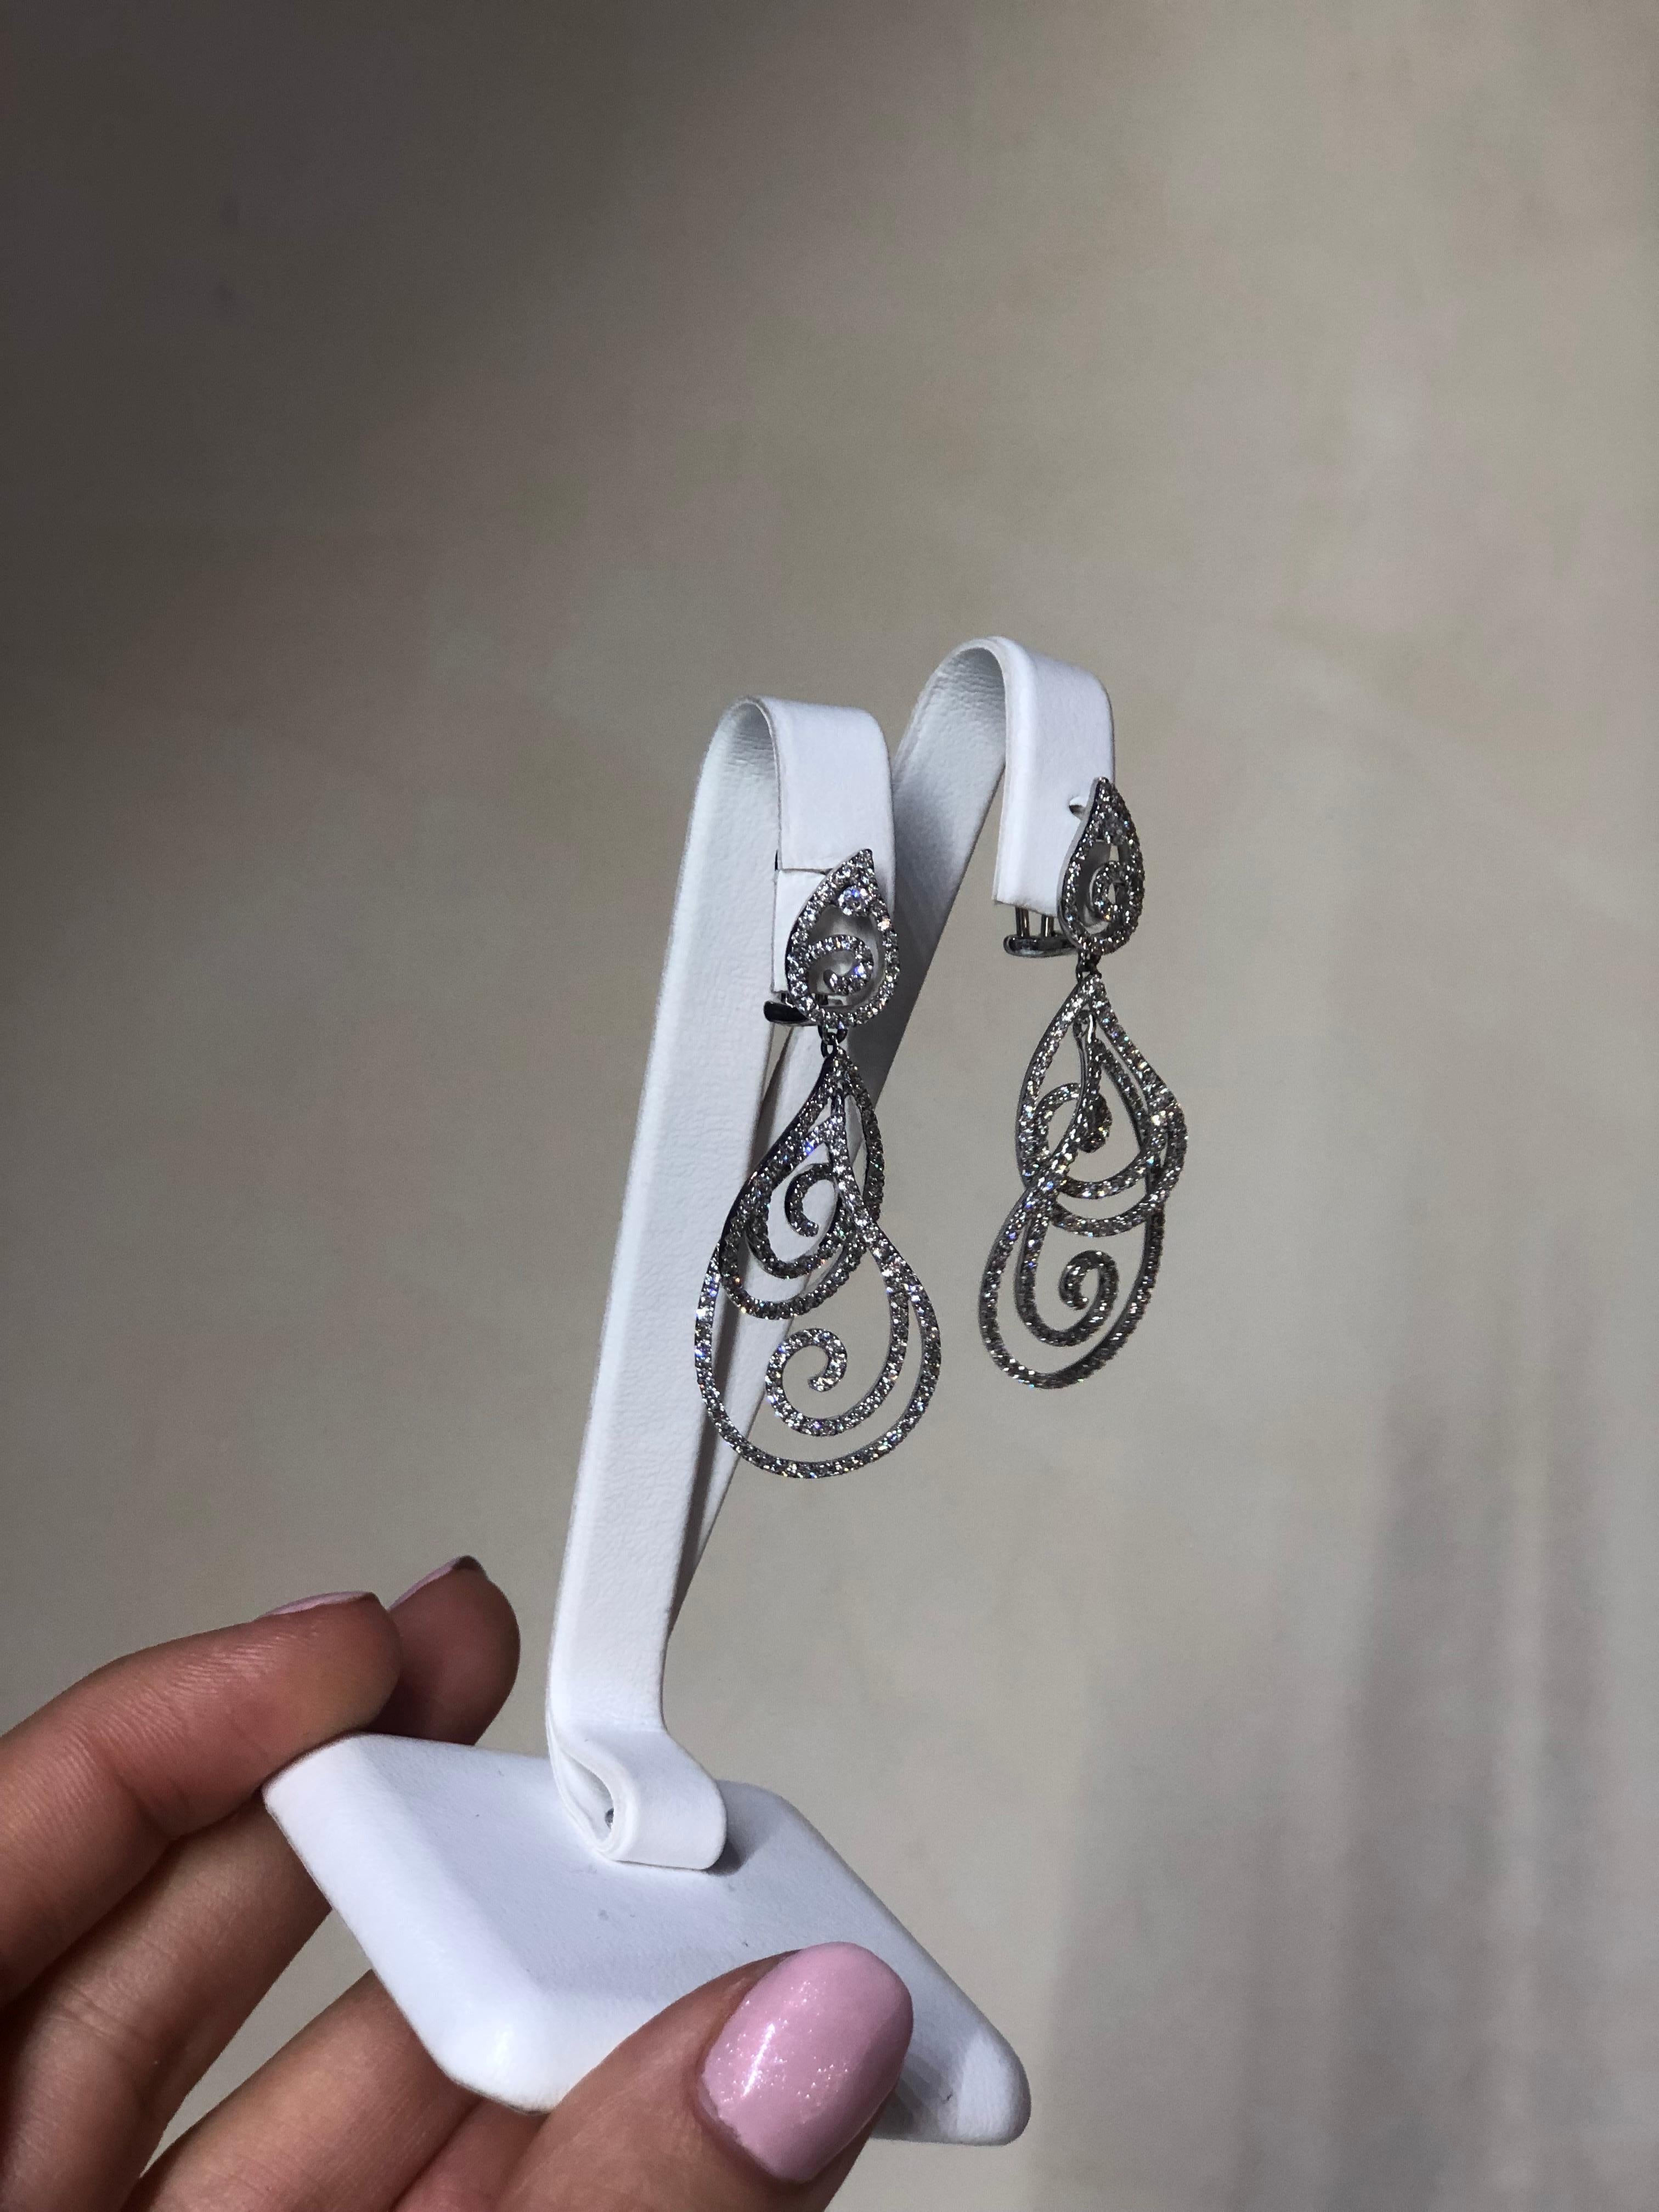 Earrings White Gold 14 K
Diamond 2-Round 57-0,12-3/6A 
Diamond Round 57-2,27-5/6A
Weight 9,72 grams

With a heritage of ancient fine Swiss jewelry traditions, NATKINA is a Geneva based jewellery brand, which creates modern jewellery masterpieces